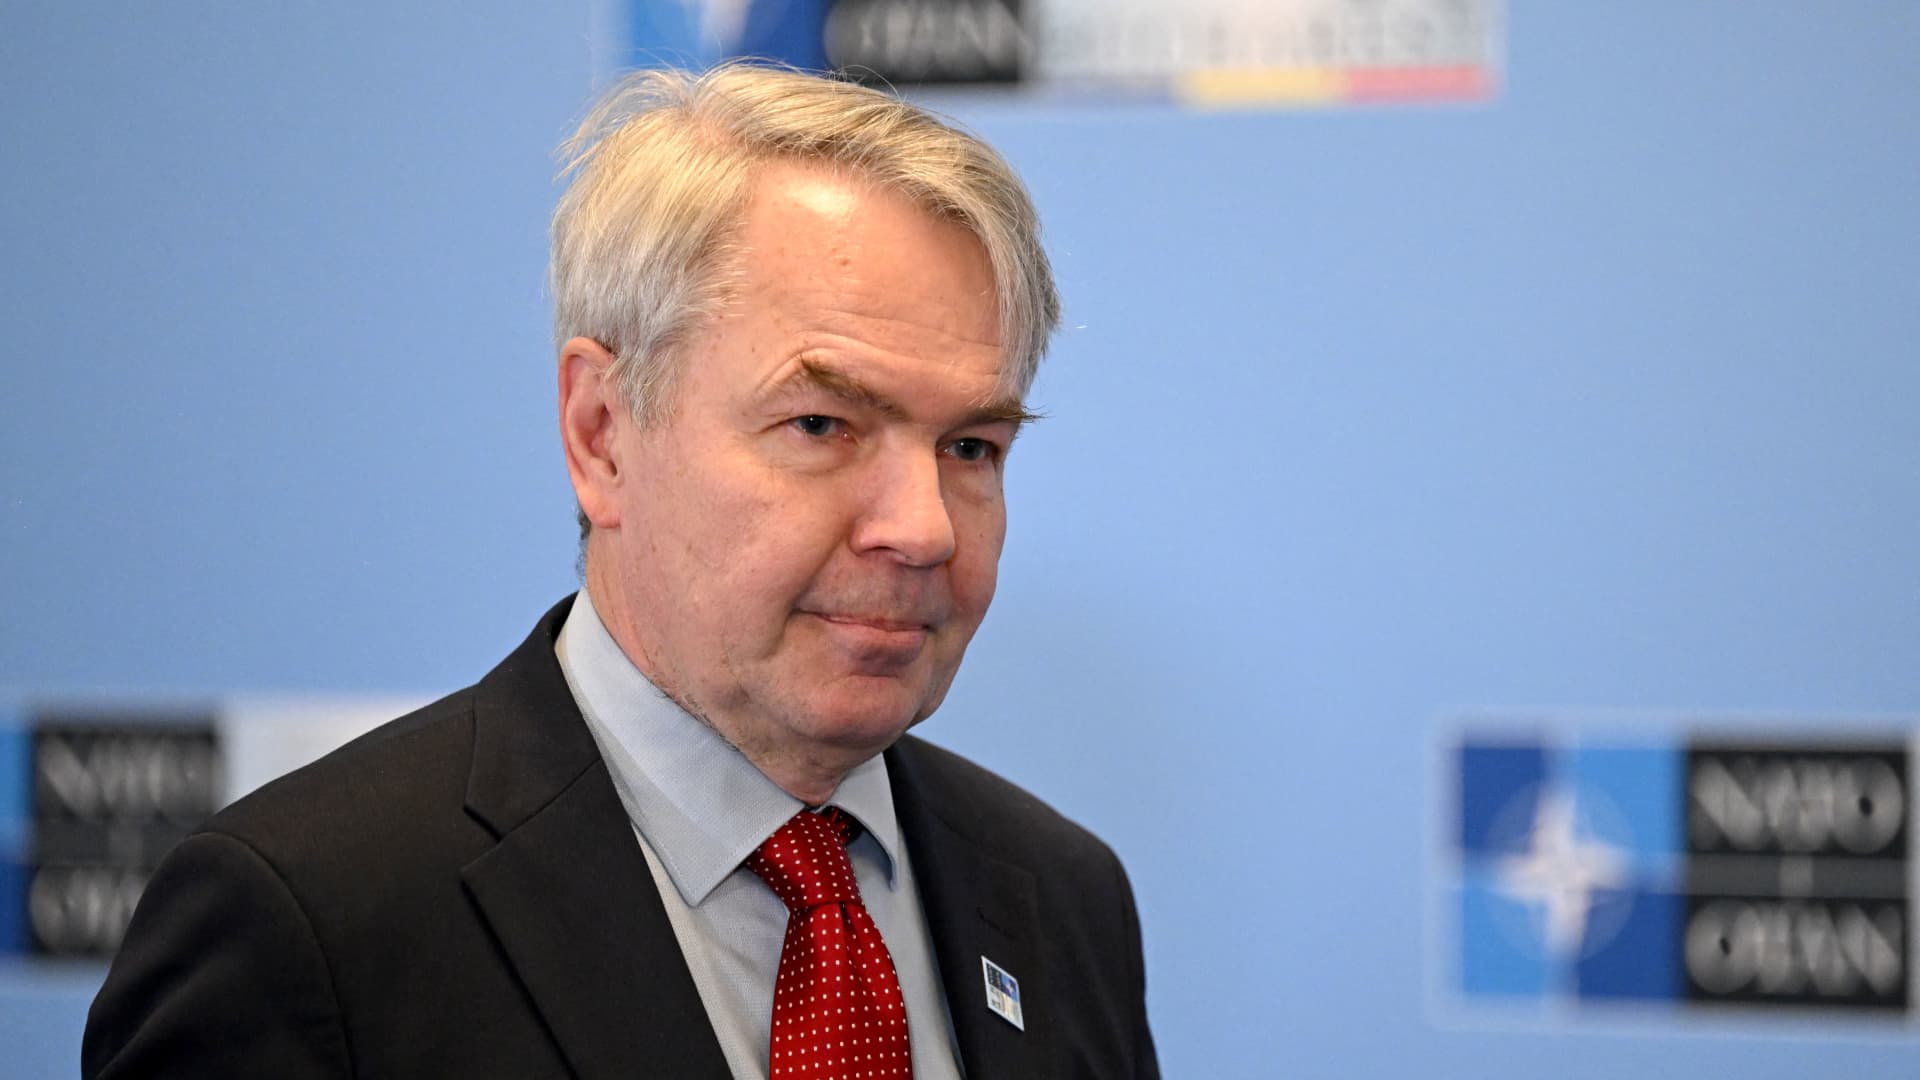 Finland's Foreign Minister Pekka Haavisto arrives for the meeting of the NATO Ministers of Foreign Affairs in Bucharest, Romania, on November 30, 2022.